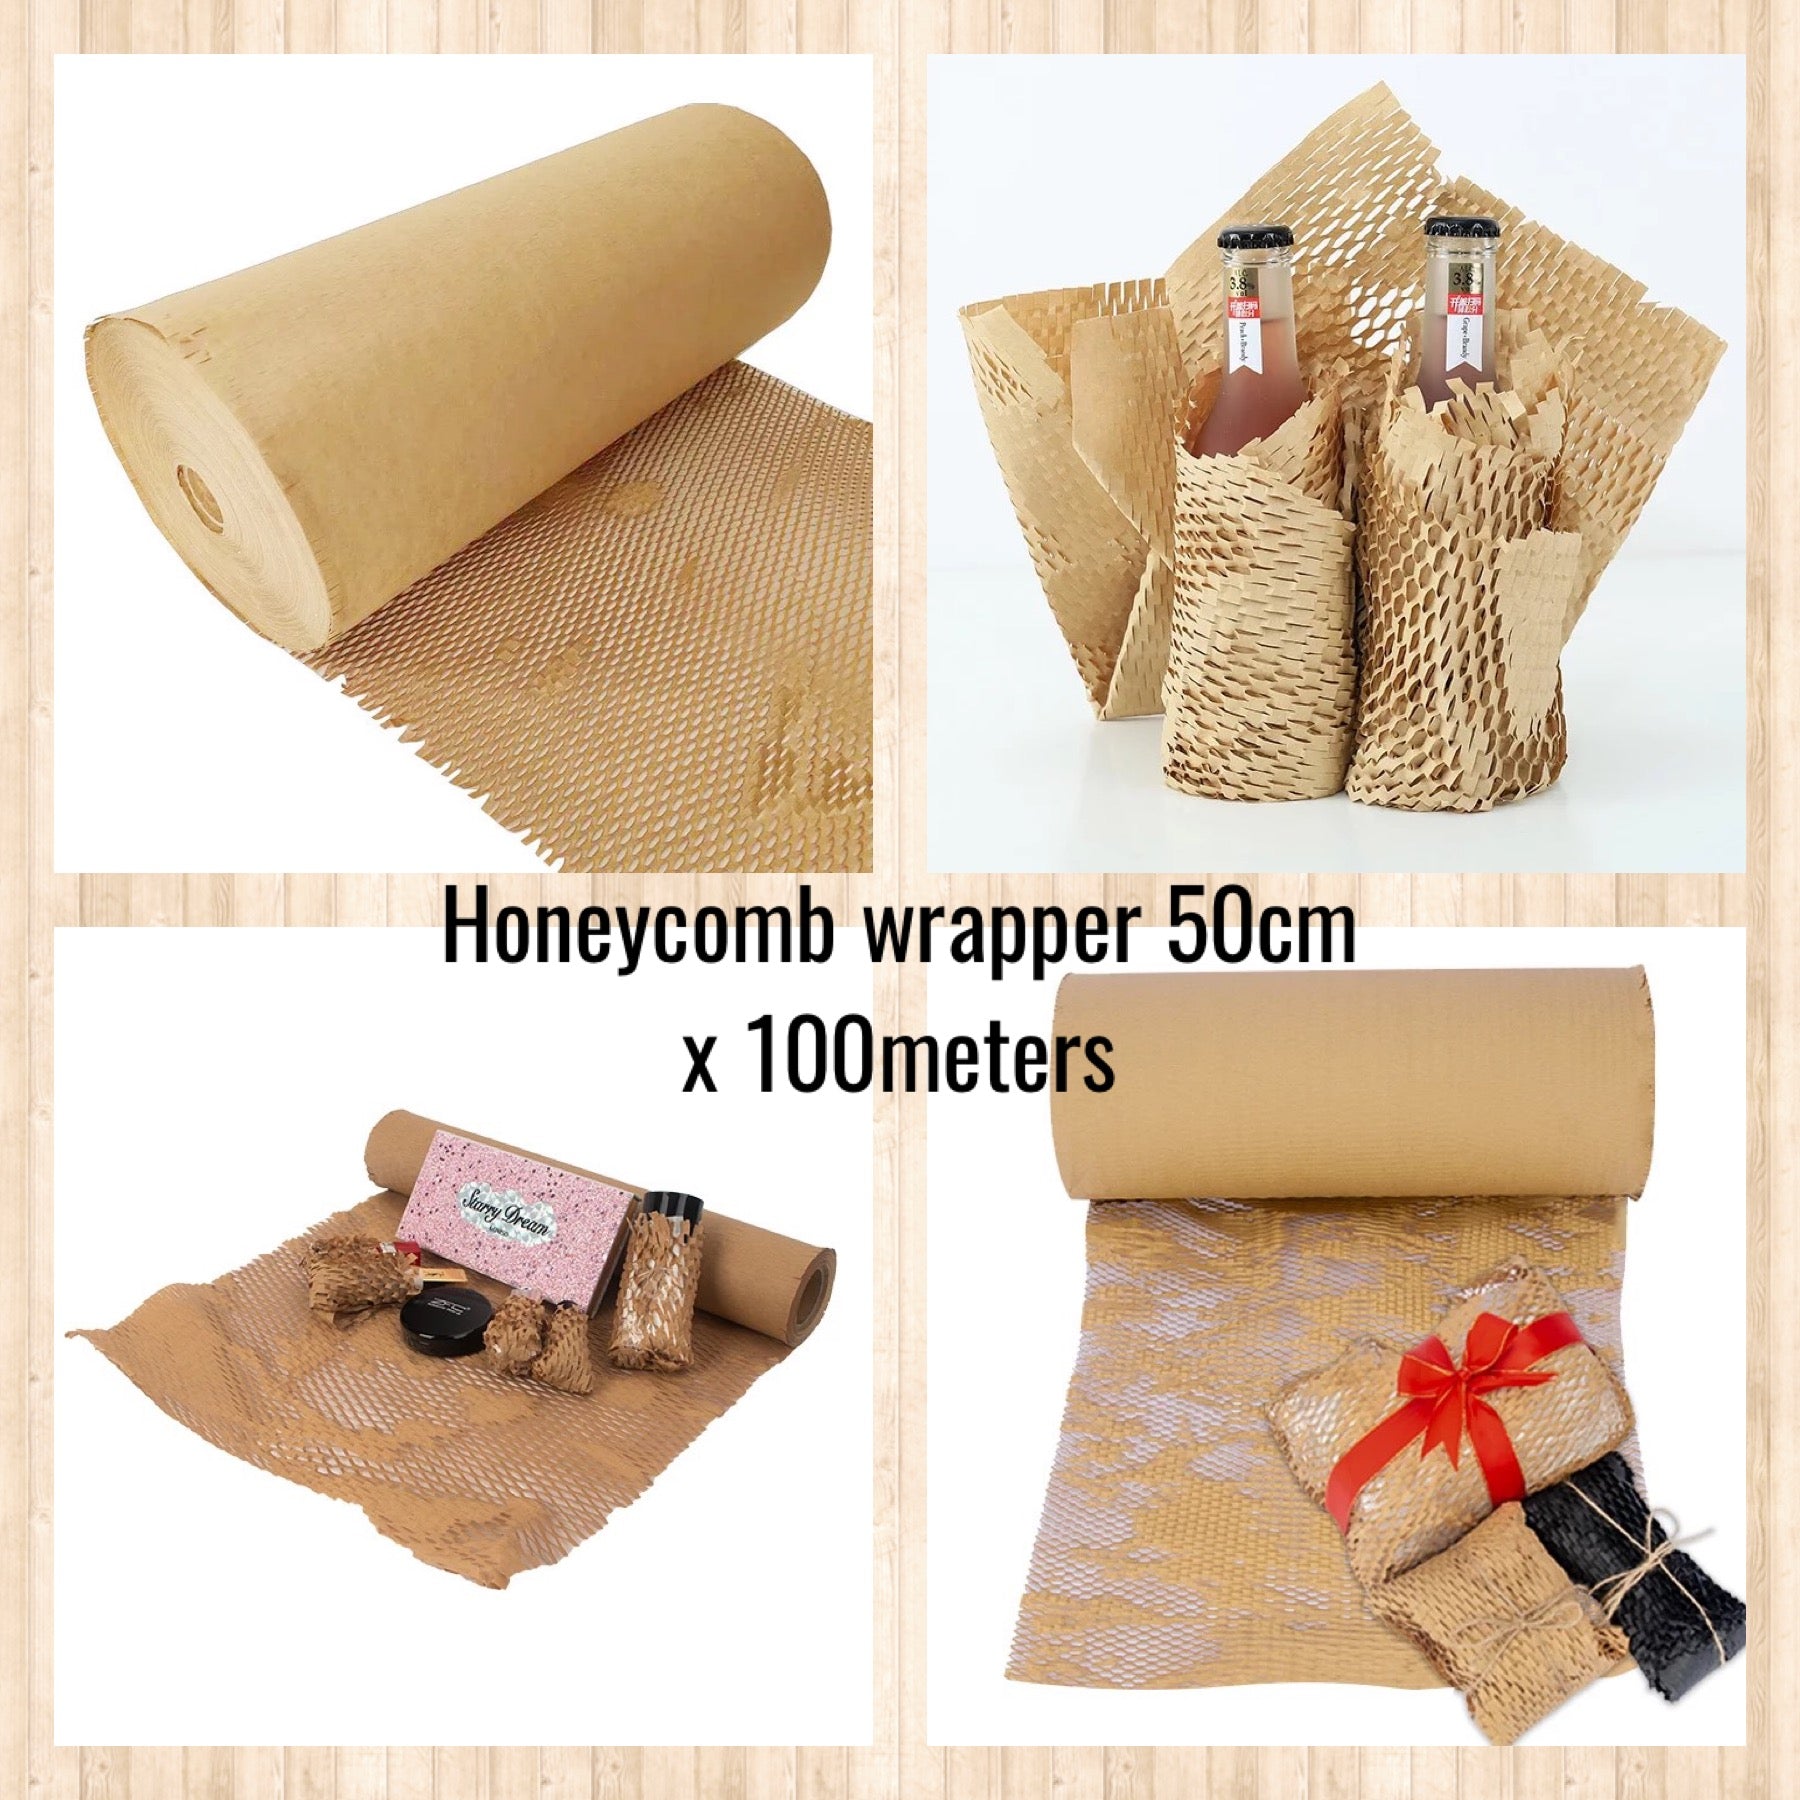 CRAFTFORCE Honeycomb Packing Paper, 12x 115' Brown Honeycomb Cushion  Wrapping Paper Roll, Sustainable Alternative to Bubble Wrap for Moving,  Shipping